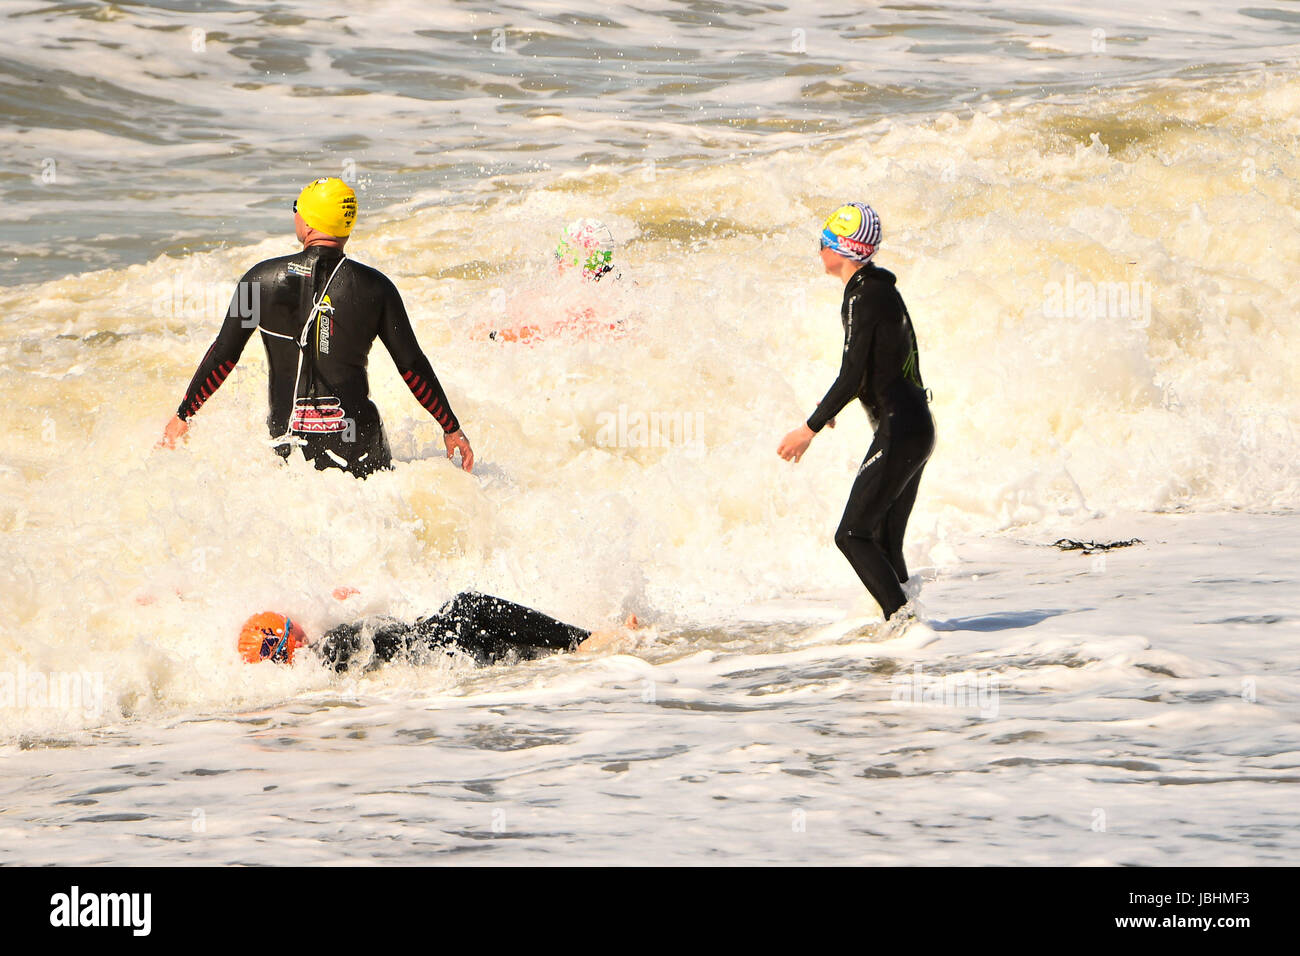 Aberystwyth Wales UK, Sunday 11 June 2017  UK Weather: A group od people in wetsuits having fun in the sea on a blustery summer sunday afternoon in Aberystwyth  on the Cardigan Bay coast of west  Wales  Photo credit: Keith Morris / ALAMY Live News Stock Photo